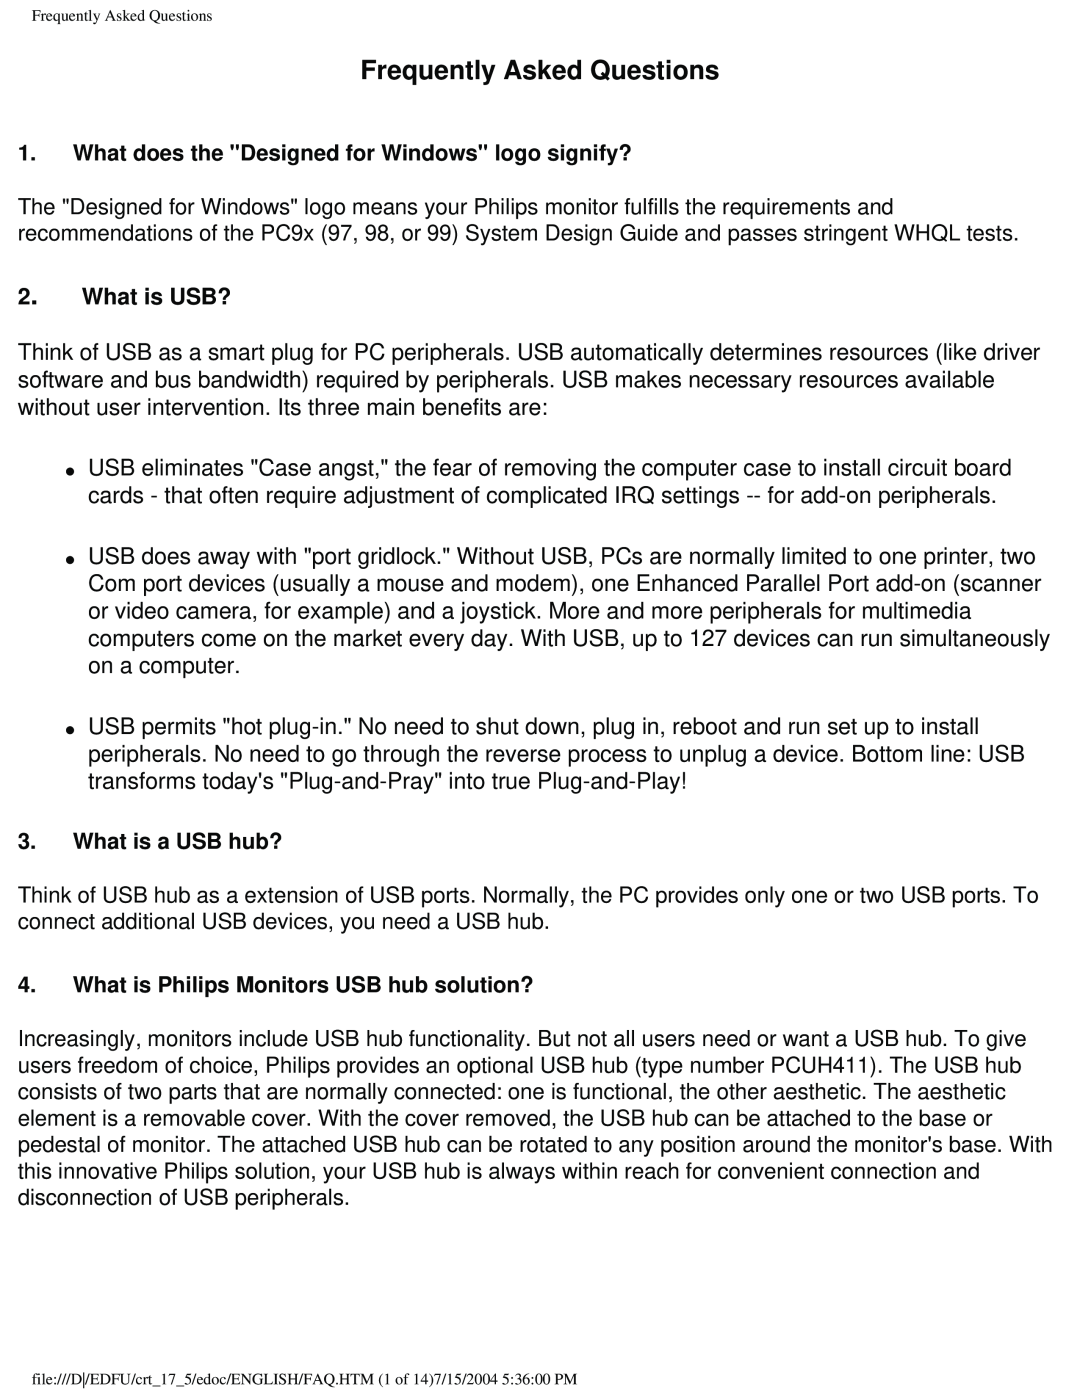 Philips 107G user manual Frequently Asked Questions, What does the Designed for Windows logo signify?, What is USB? 